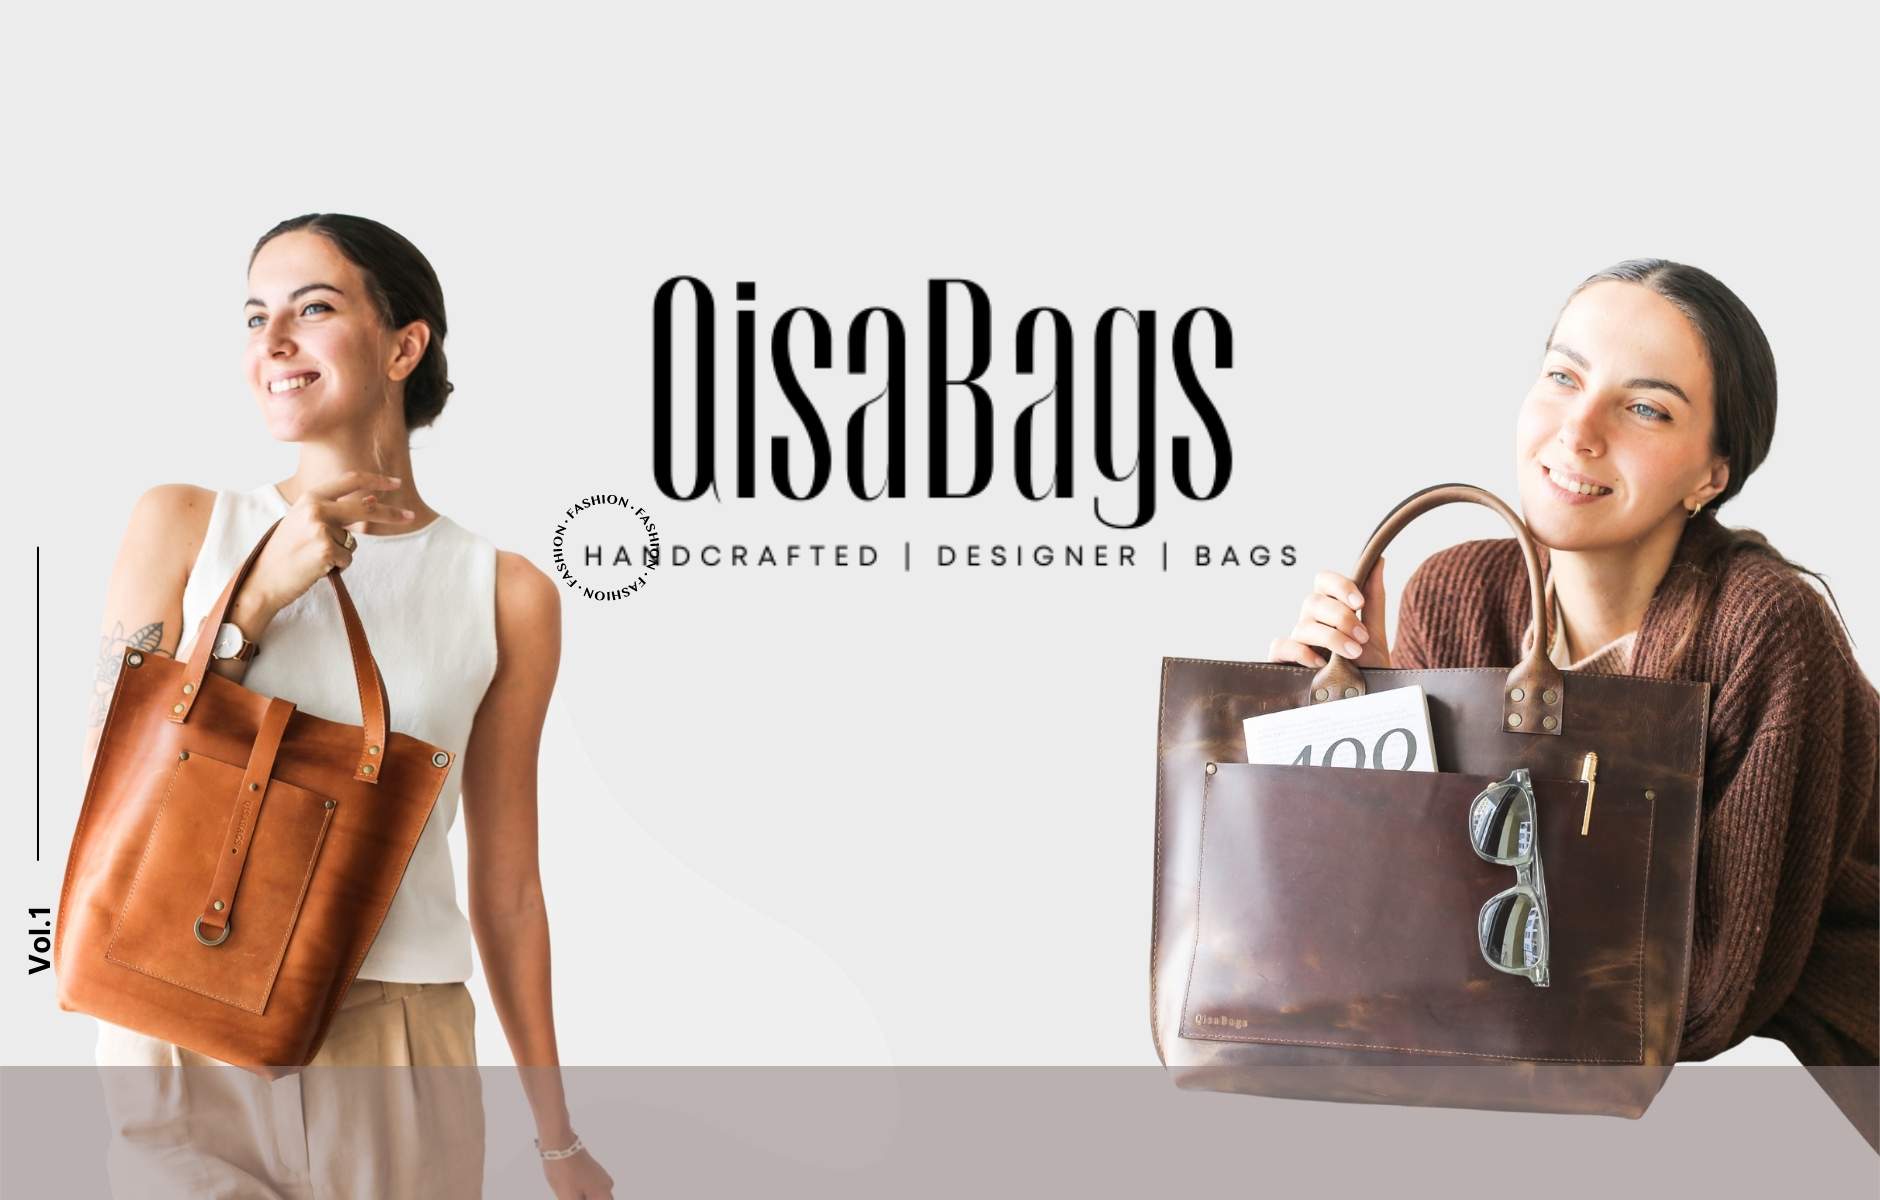 Are Shopping Bags the New Designer Bags?